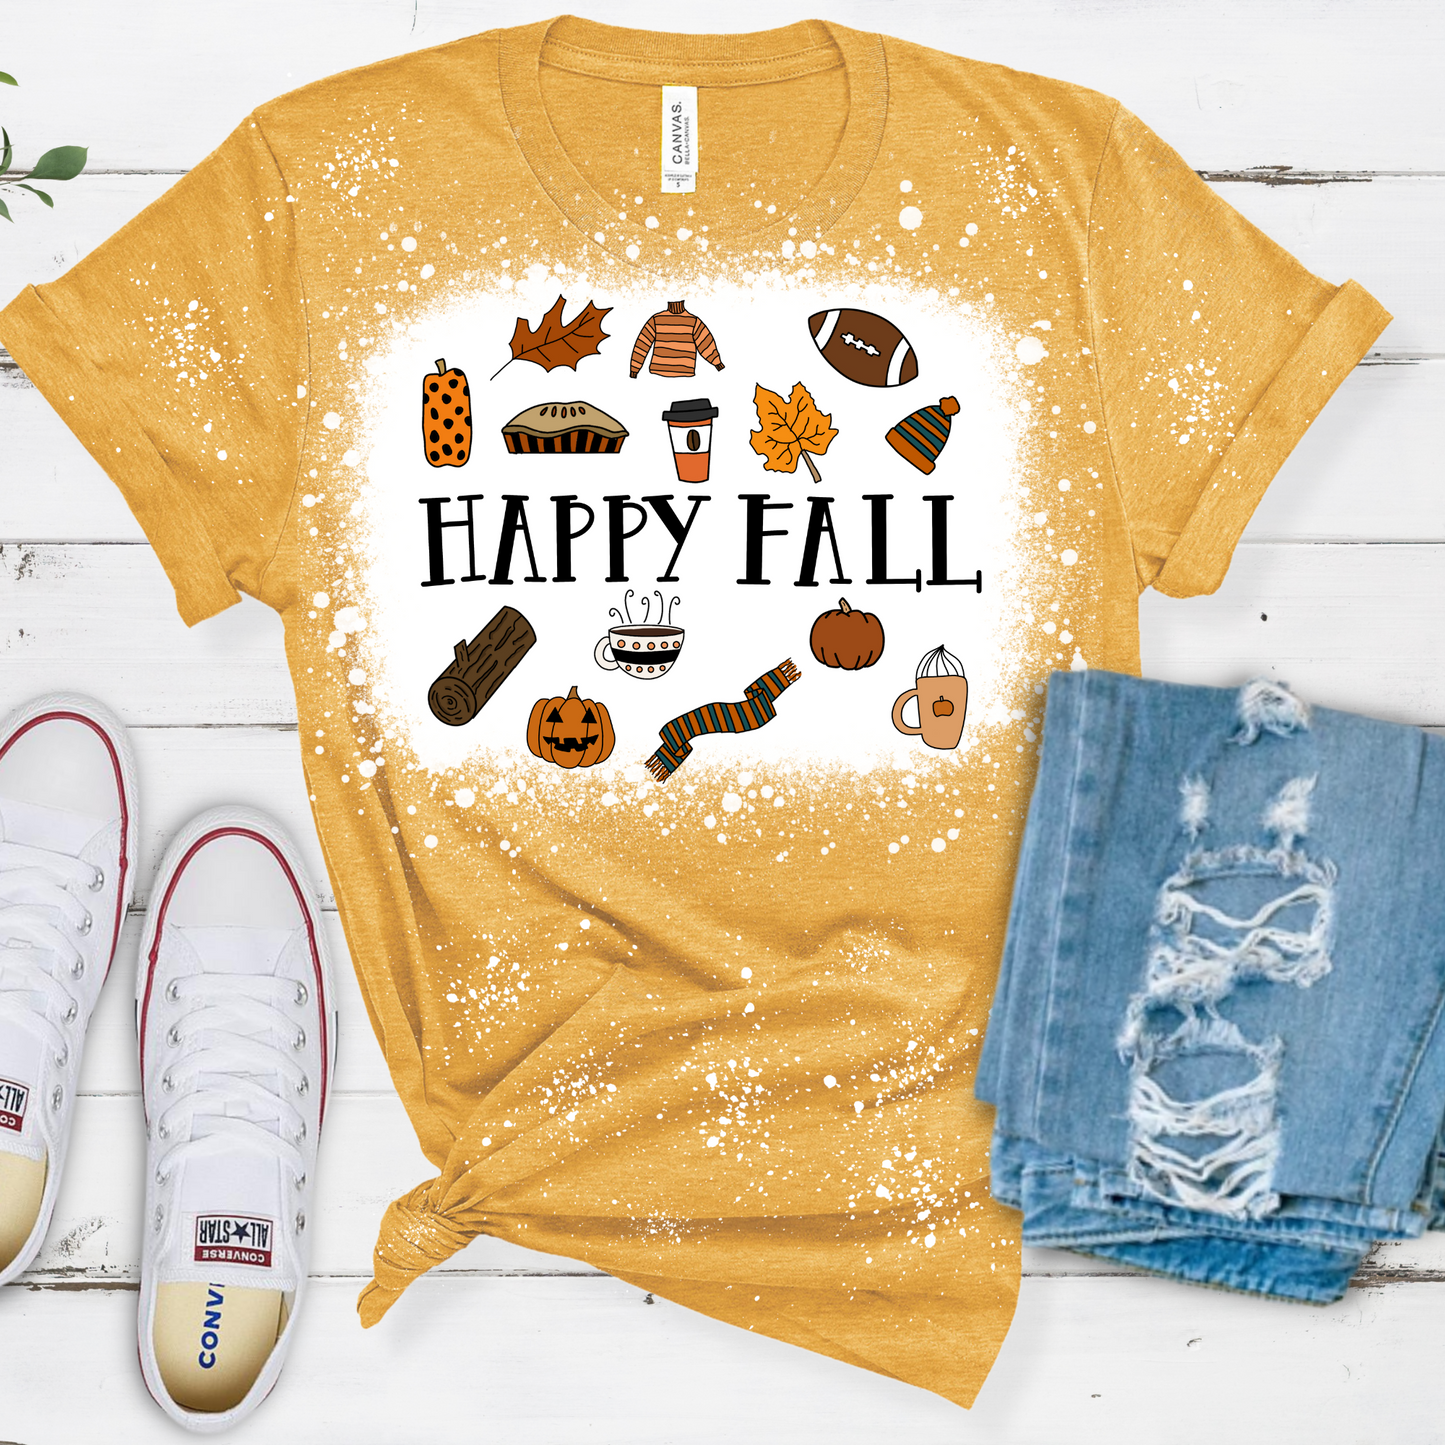 Happy Fall Bleached Shirt